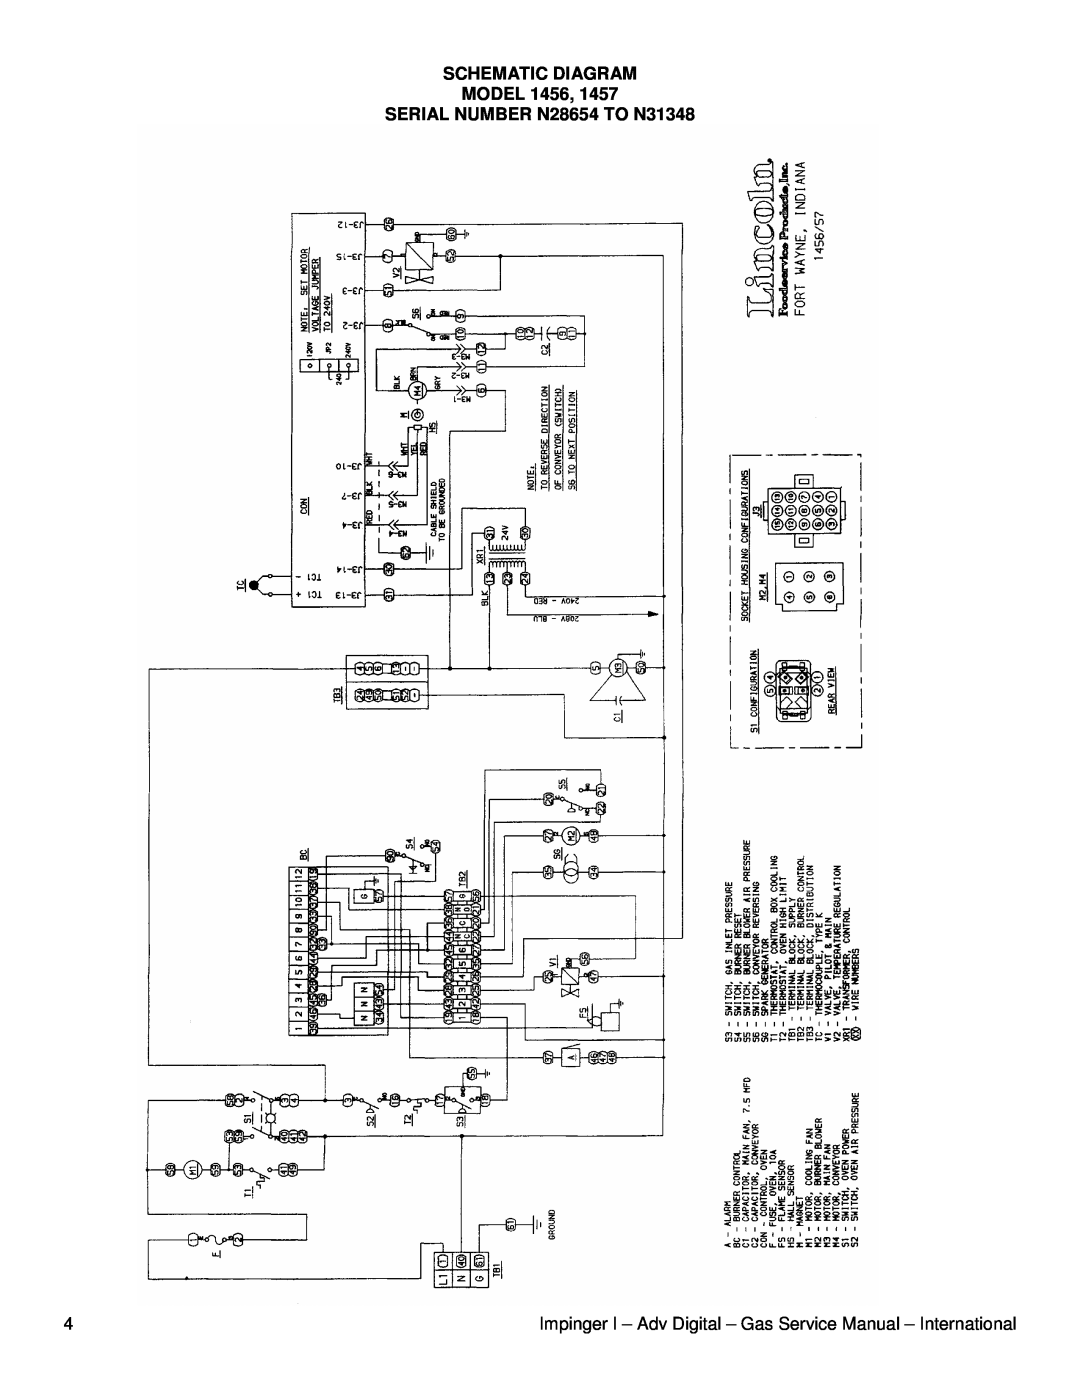 Sigma 1433-000-E, 1456, 1457, 1434-000-E service manual Schematic Diagram Model, SERIAL NUMBER N28654 TO N31348 